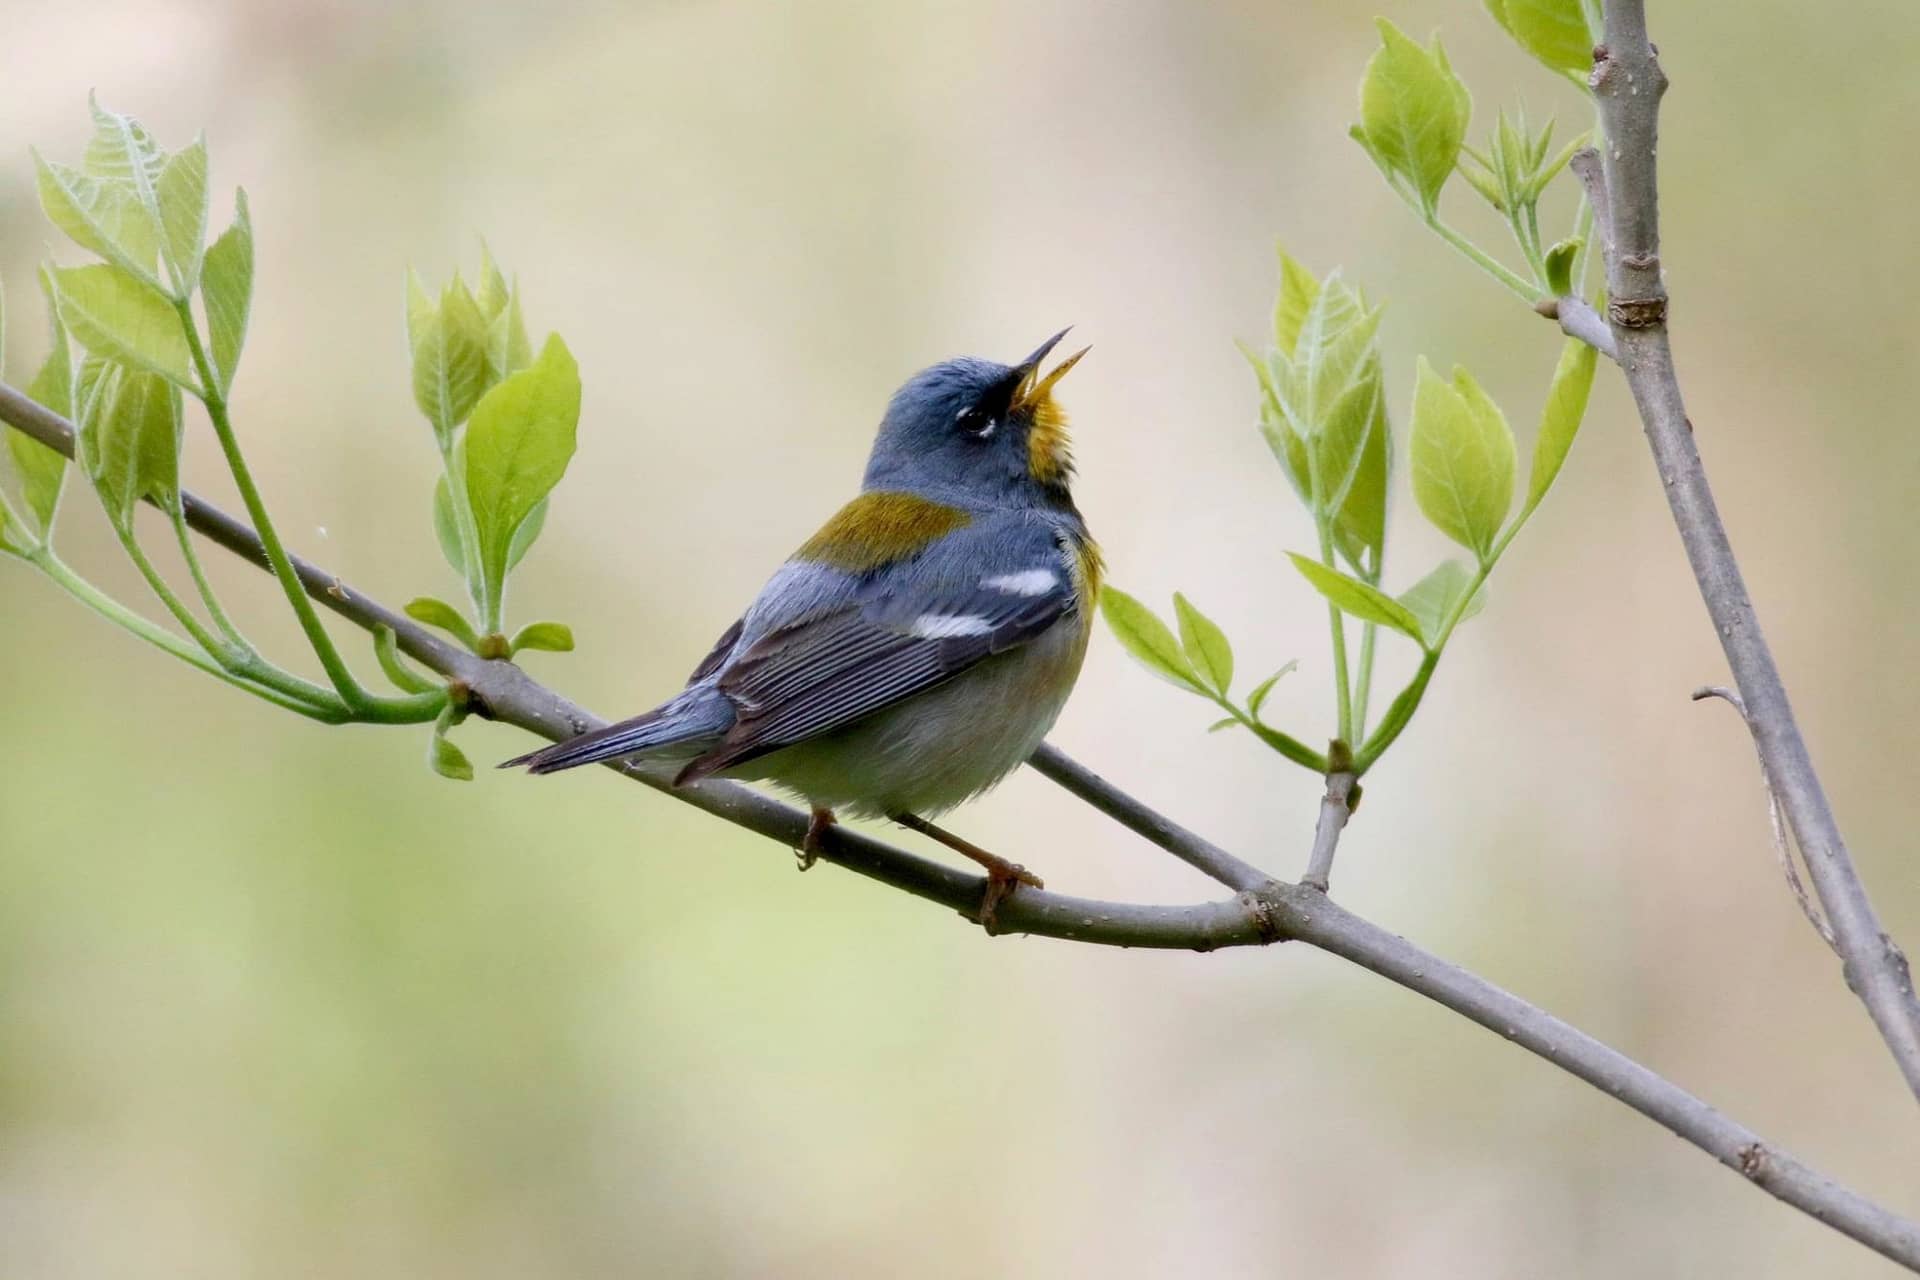 Northern Parulas sing two distinct songs. (Photo by Chris Brown)